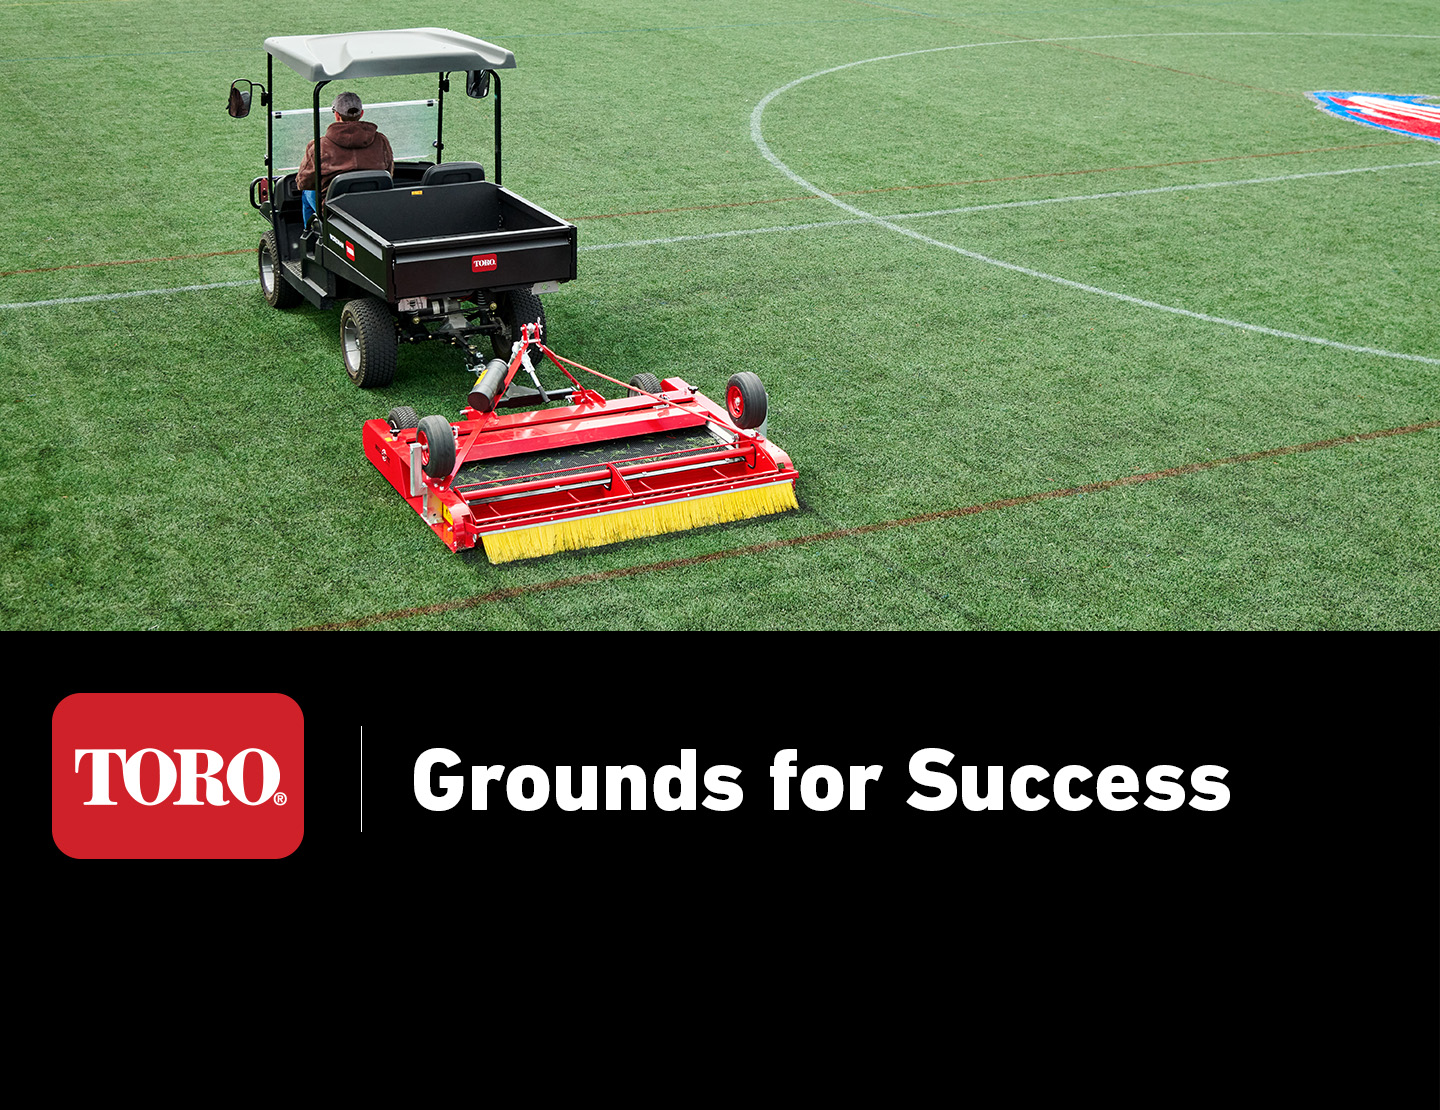 Keep Synthetic Turf Play-Ready With Bullseye Products